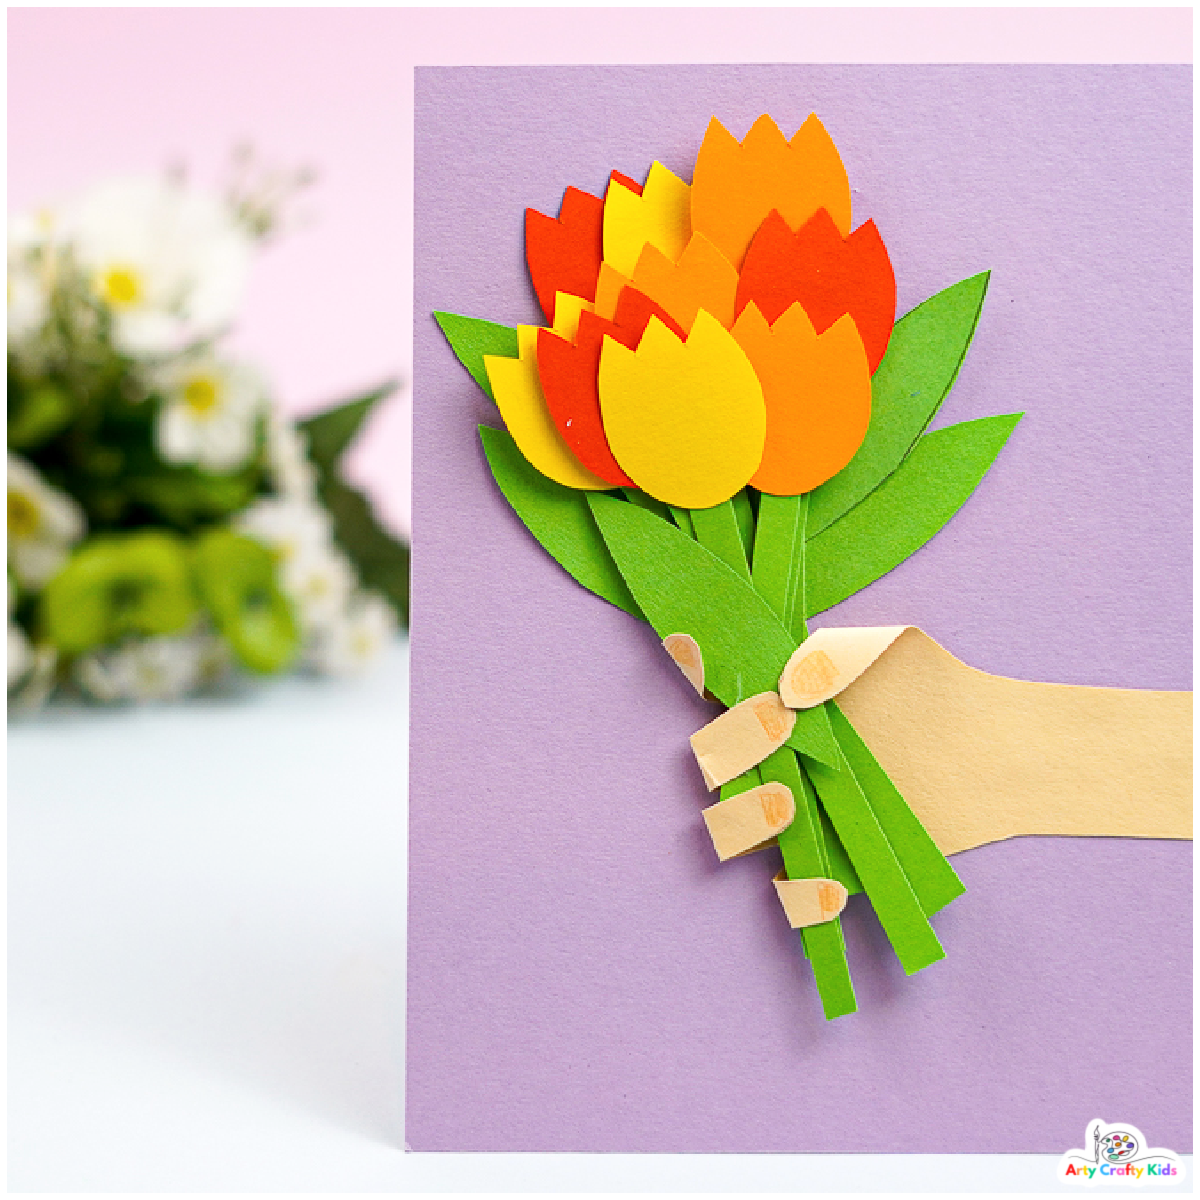 Mother's Day Flower Card for Kids to Make - An easy Mother's Day craft for the classroom or at home.